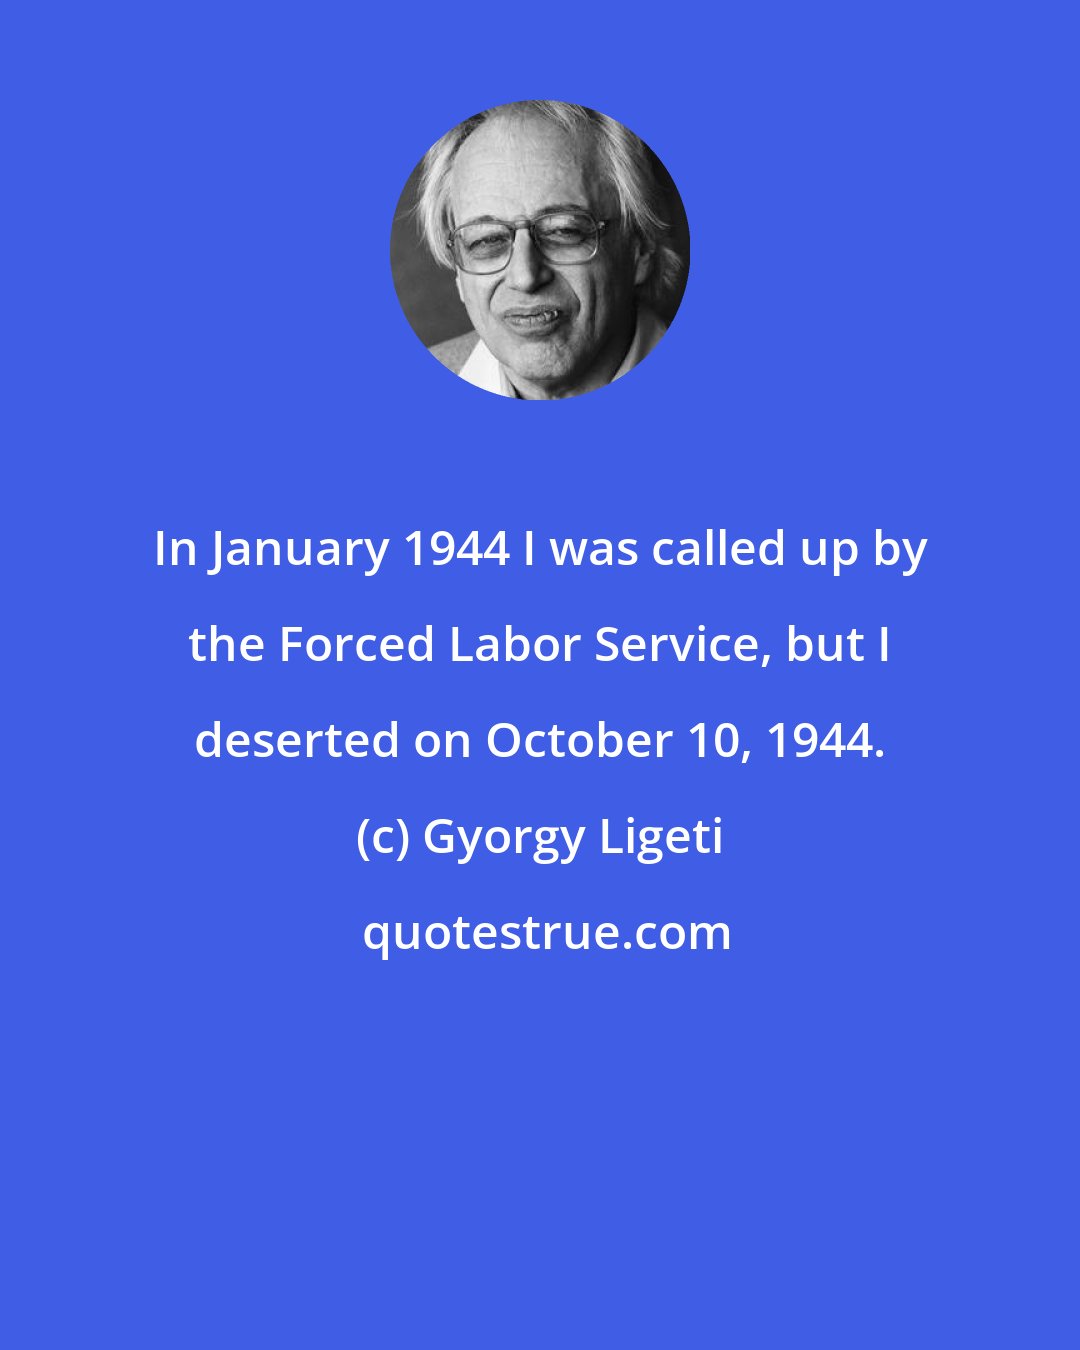 Gyorgy Ligeti: In January 1944 I was called up by the Forced Labor Service, but I deserted on October 10, 1944.